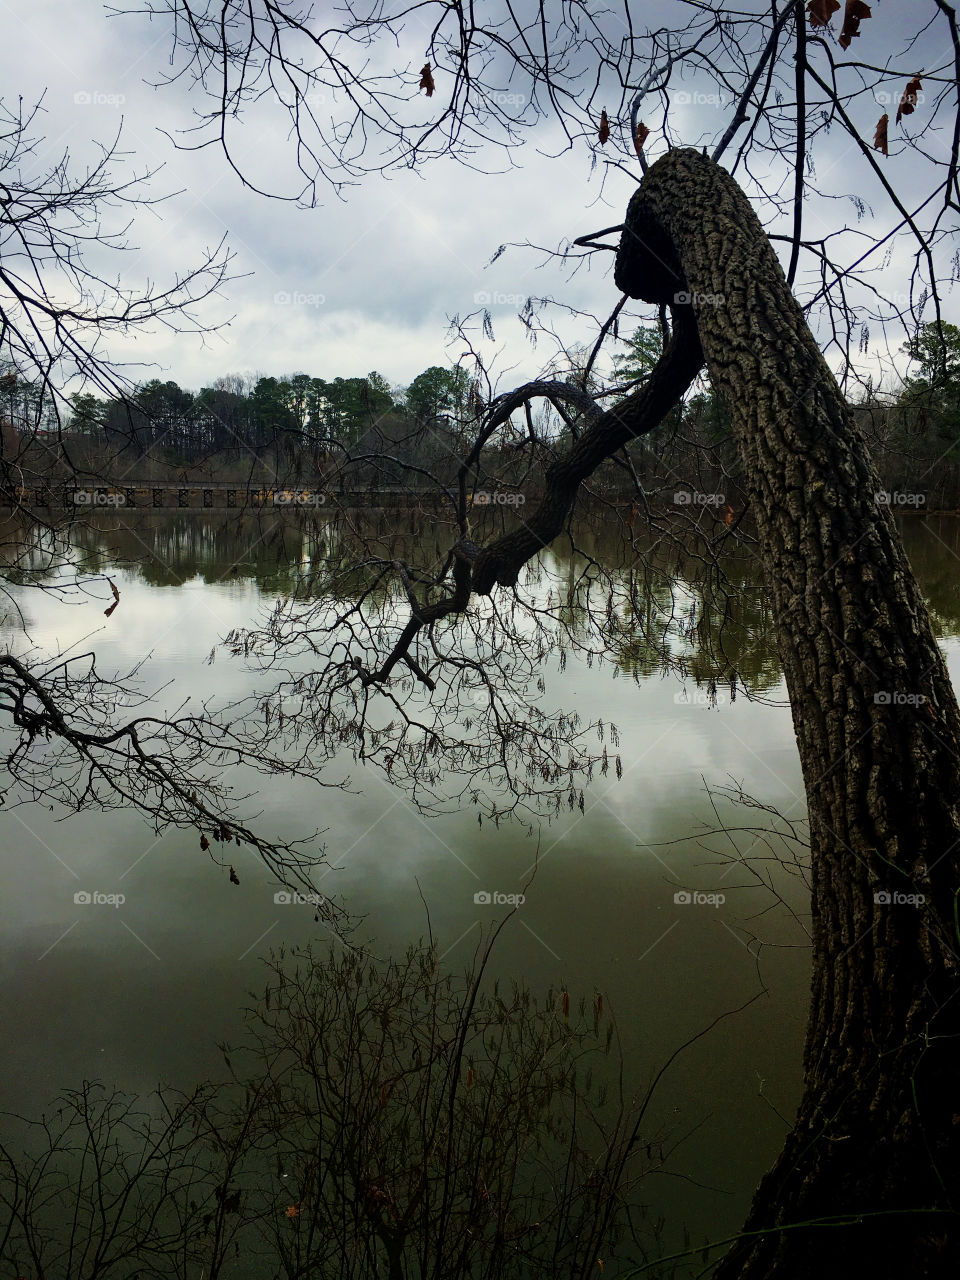 A tree arches over the pond with an old wooden footbridge visible on the other side. Reflections of clouds and trees are visible on the calm still surface of the water. 